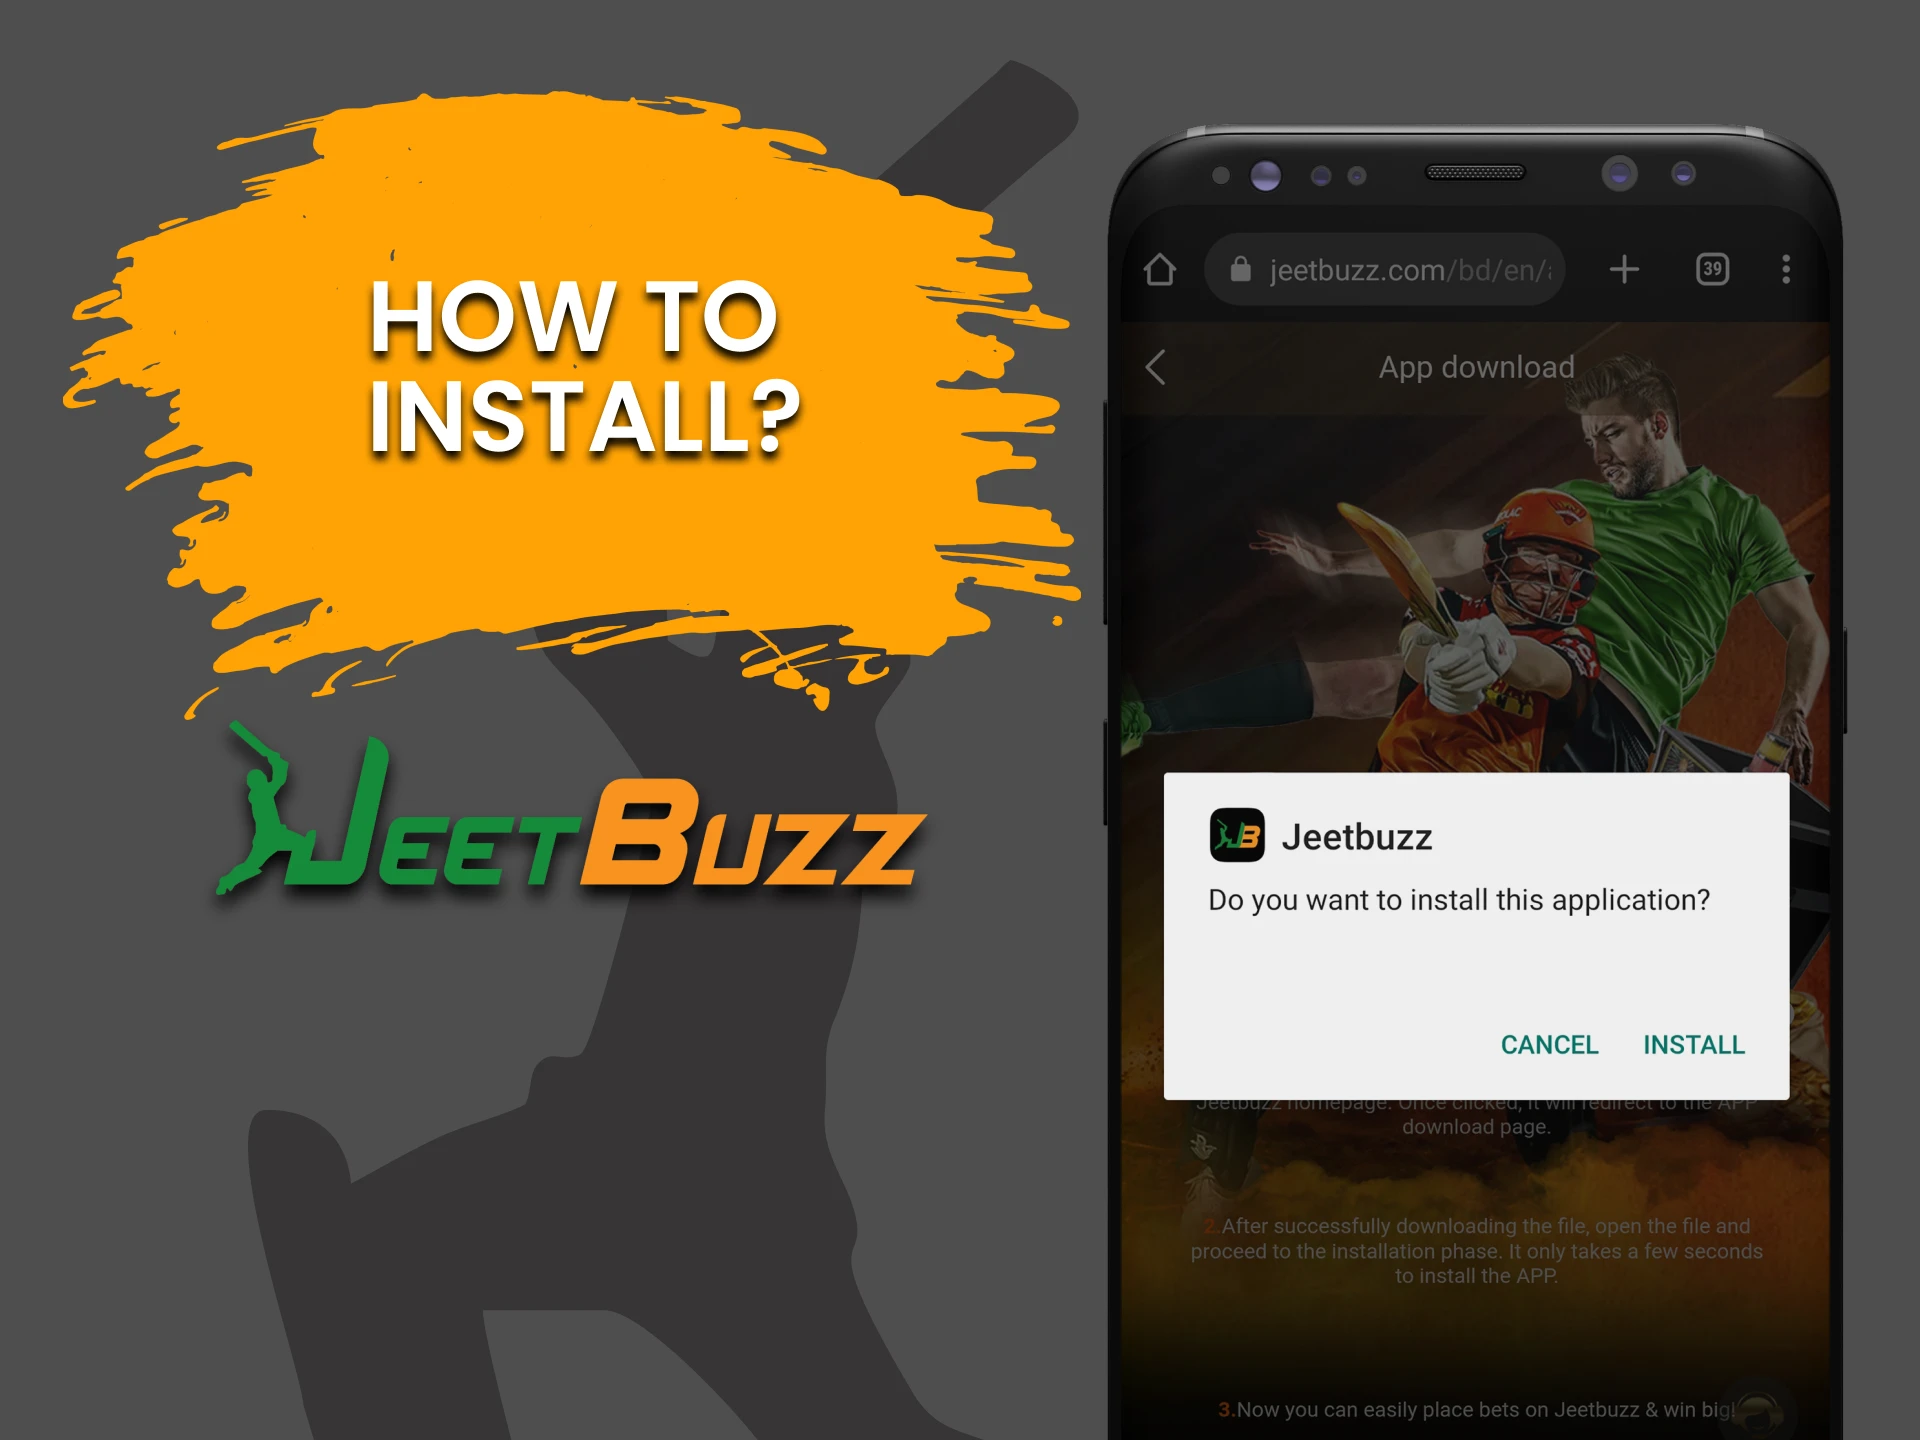 We'll show you how to install the JeetBuzz app.